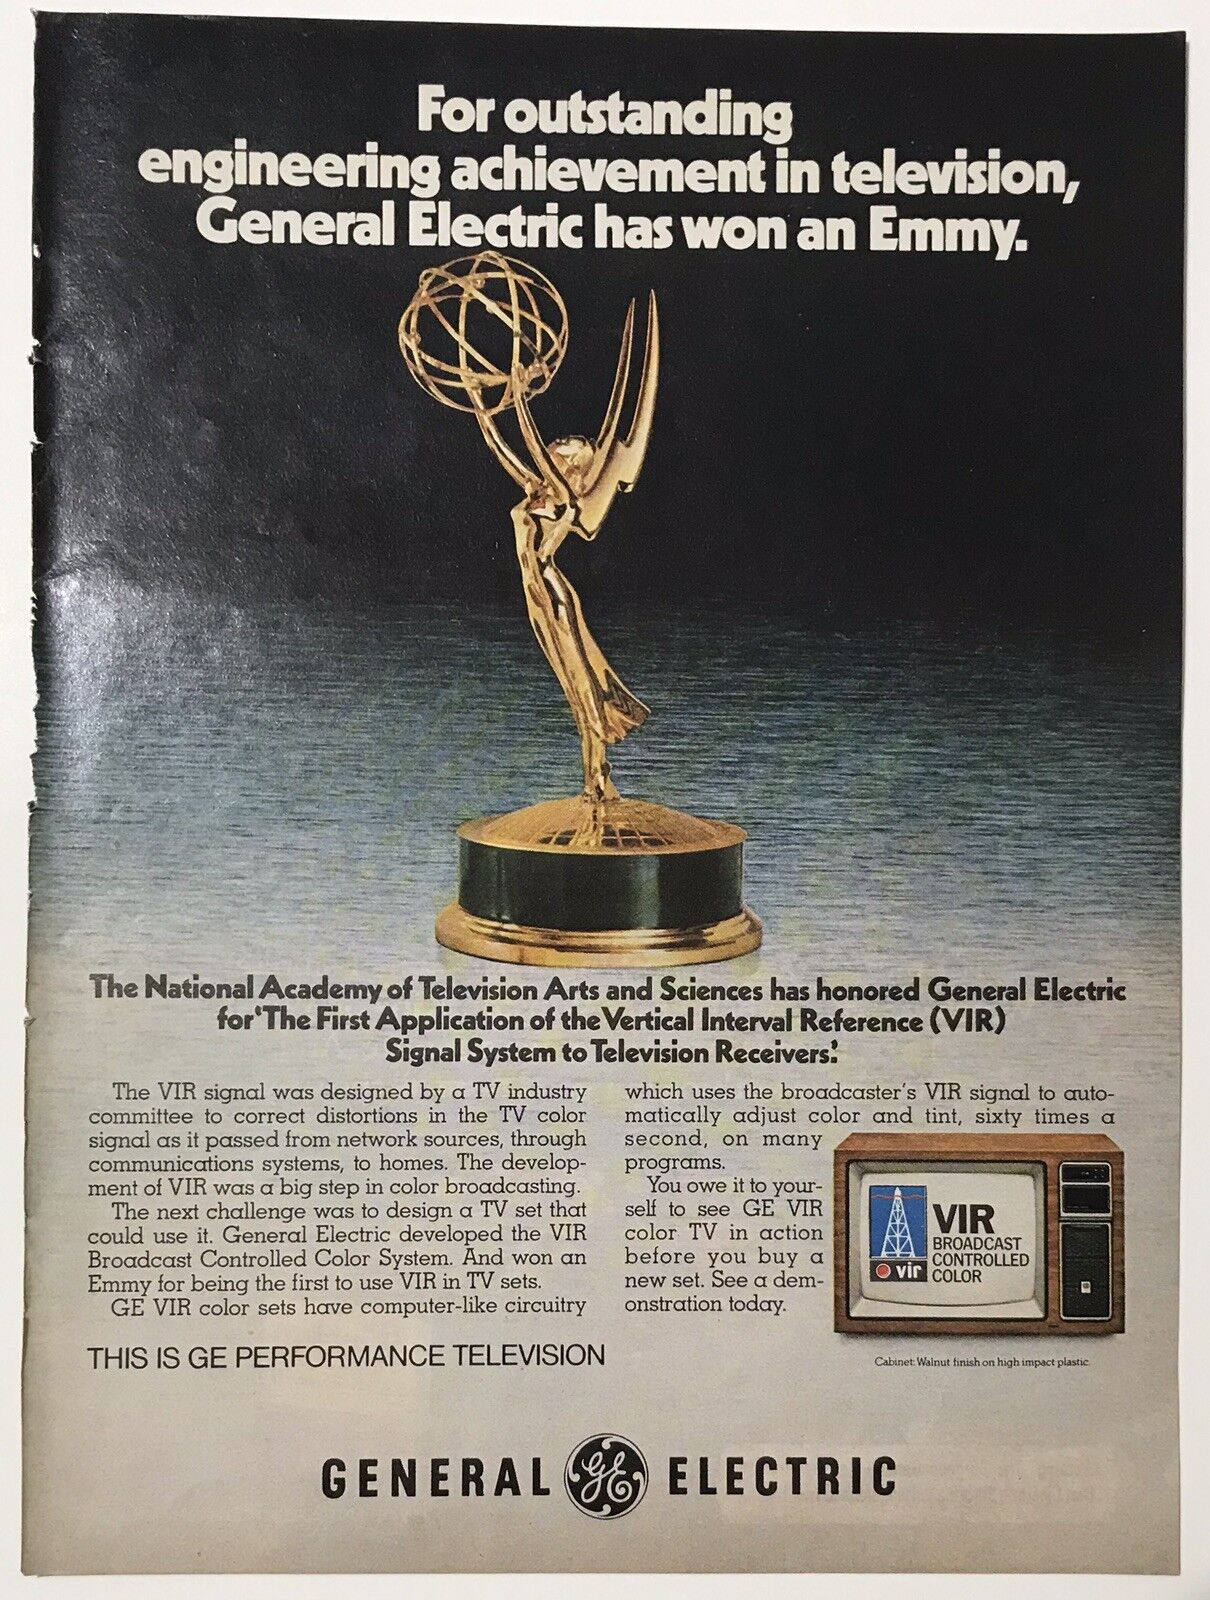 1978 GE General Electric Emmy VIR Technology Full Page Print Advertisement Ad